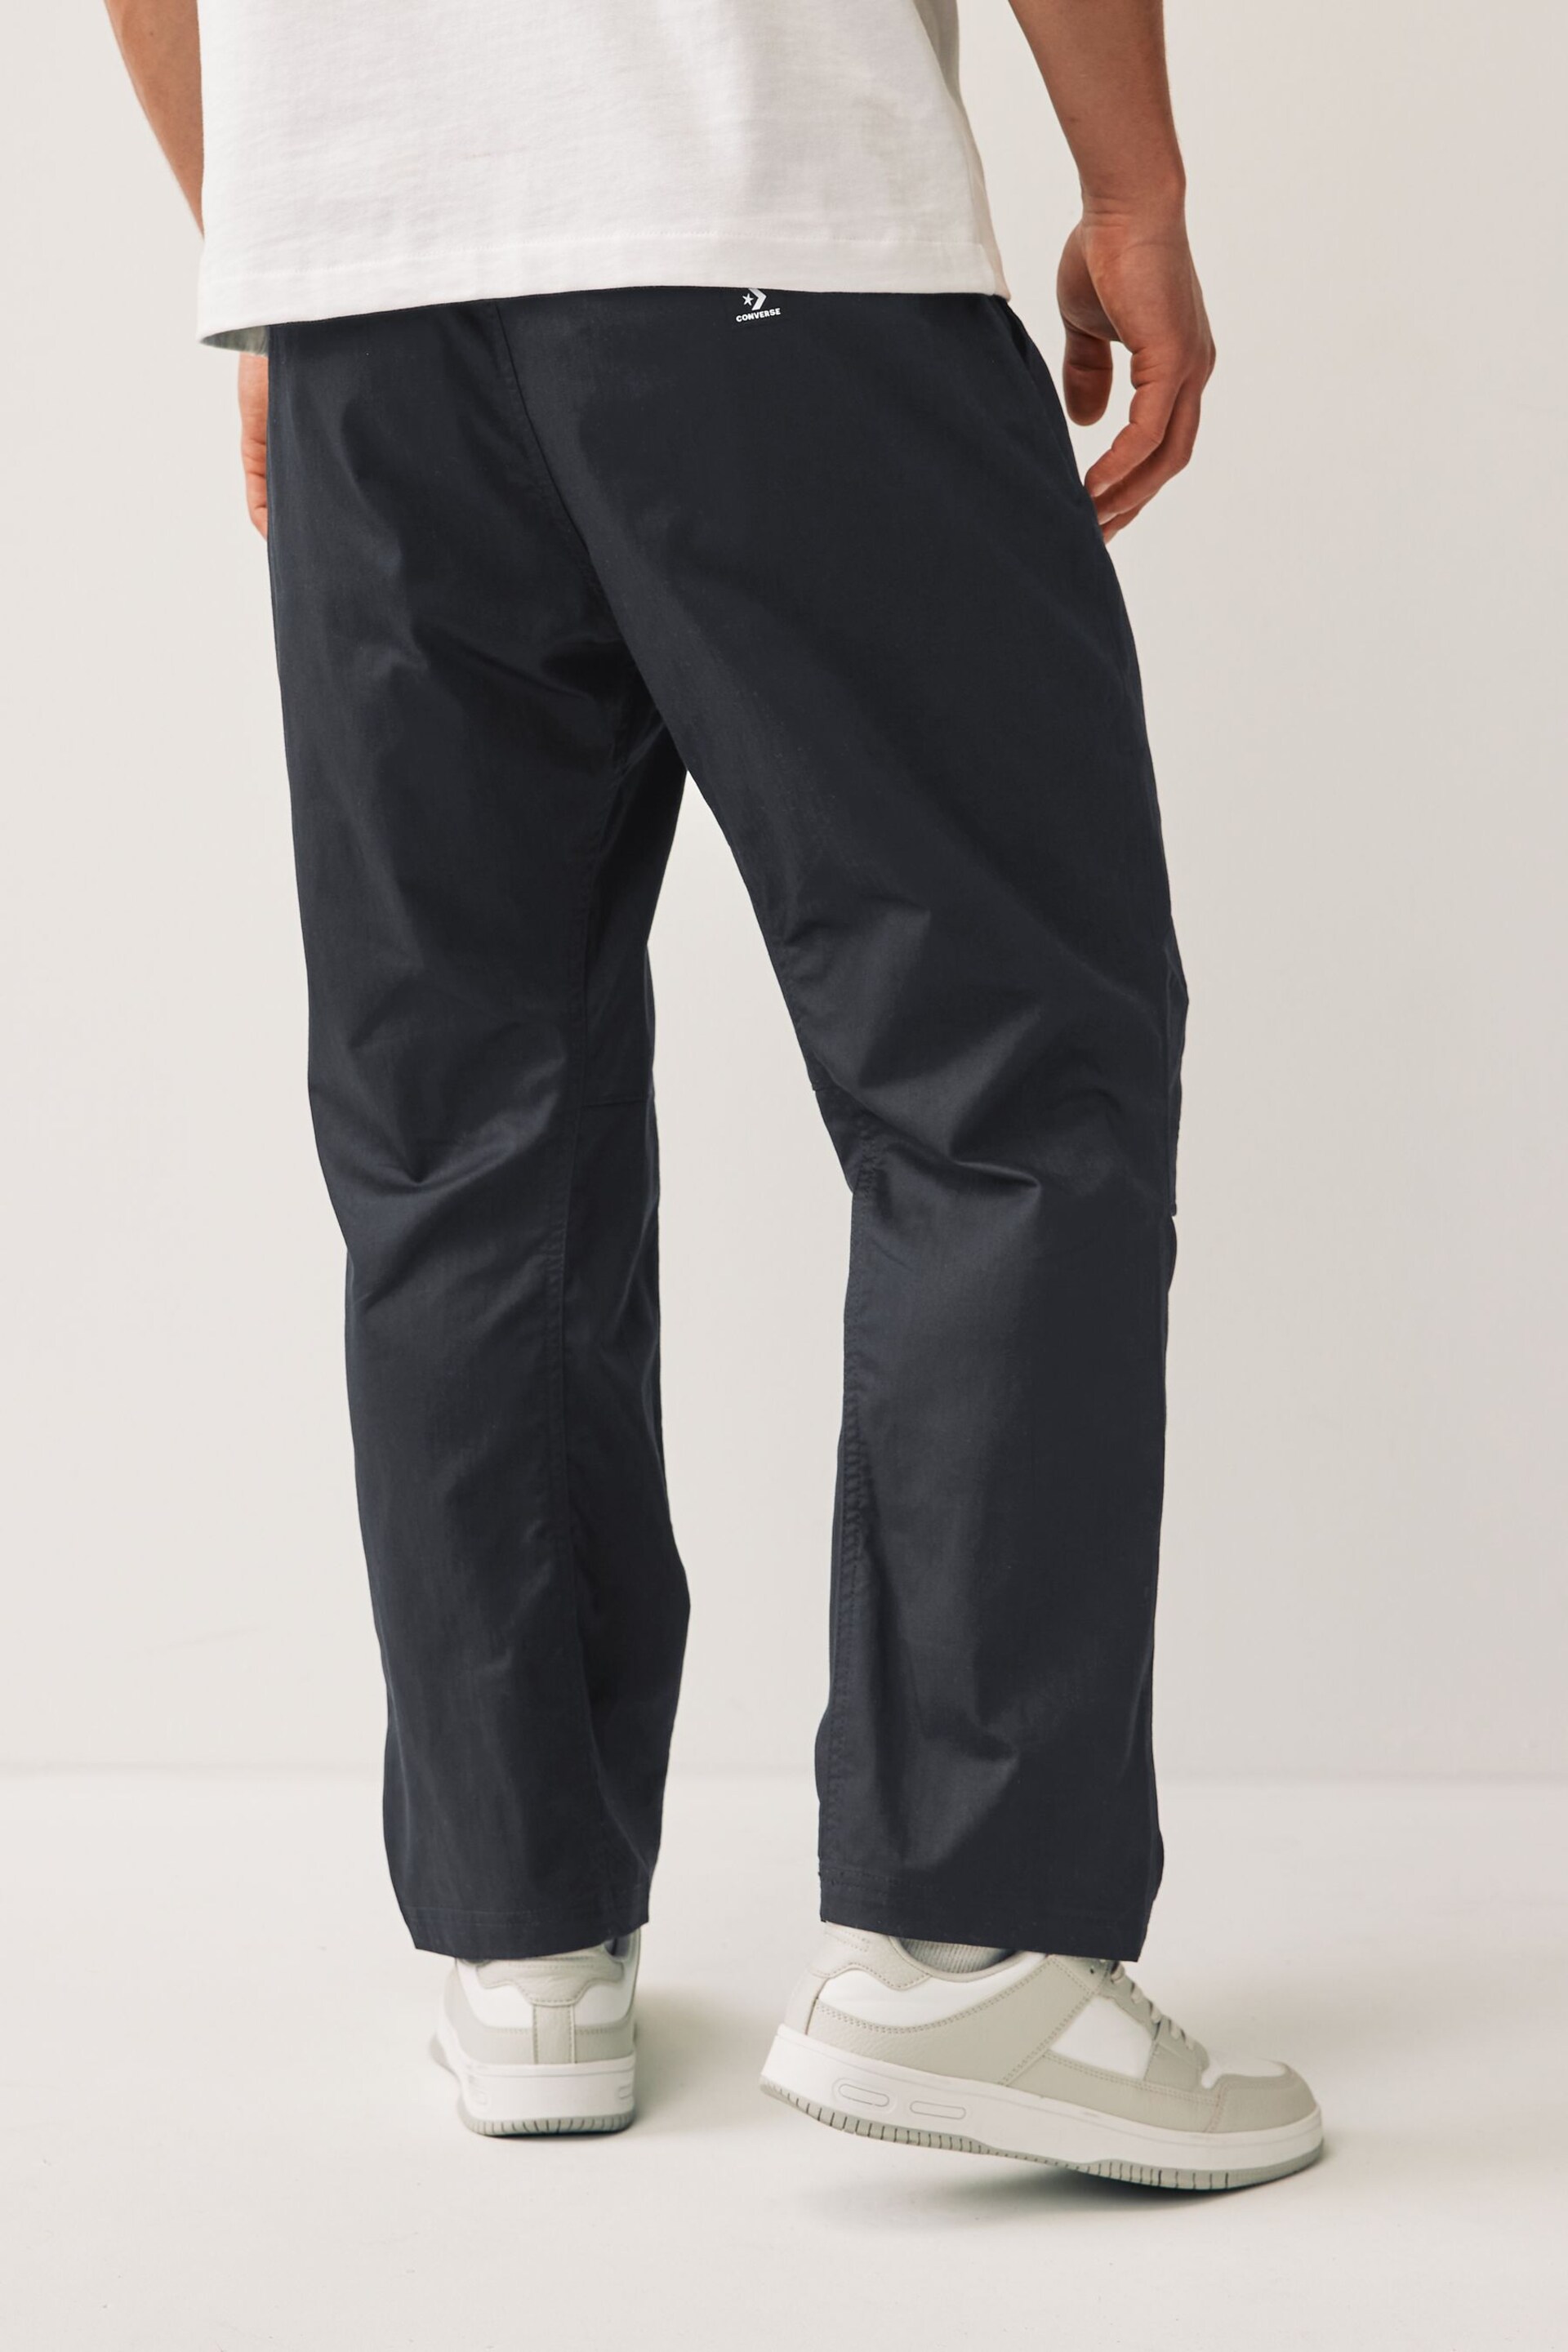 Converse Black Elevated Woven Adjustable Trousers - Image 2 of 5